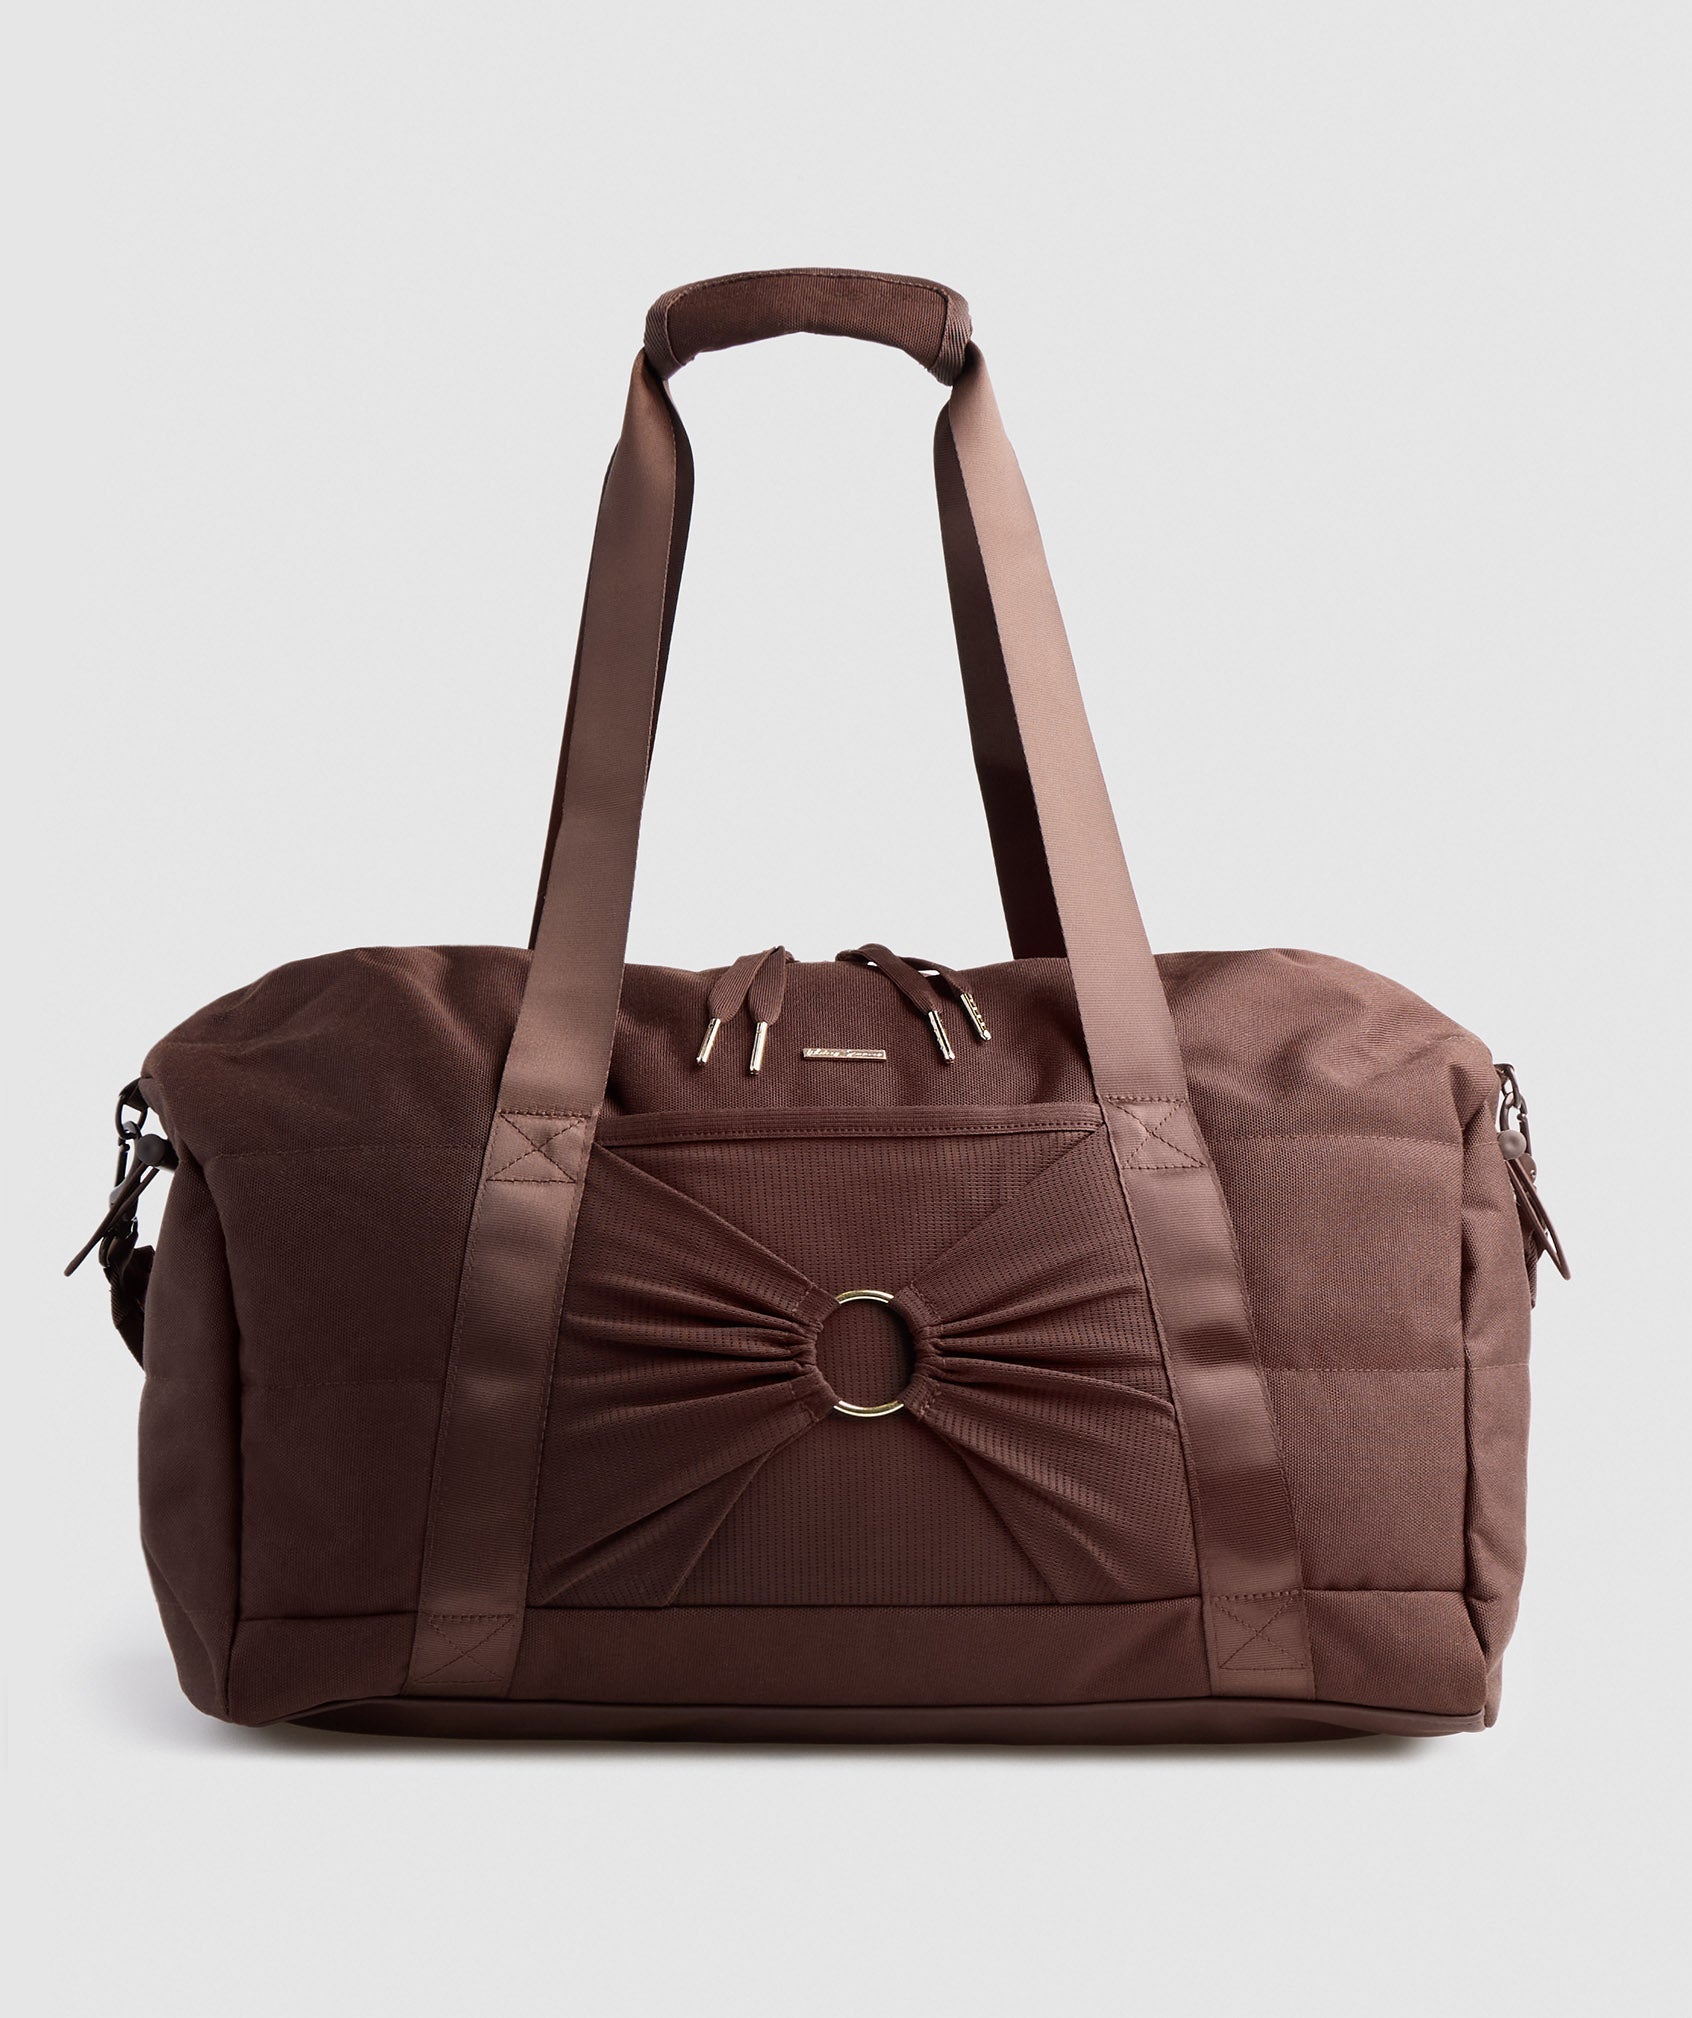 Whitney Gym Bag in Rekindle Brown - view 1